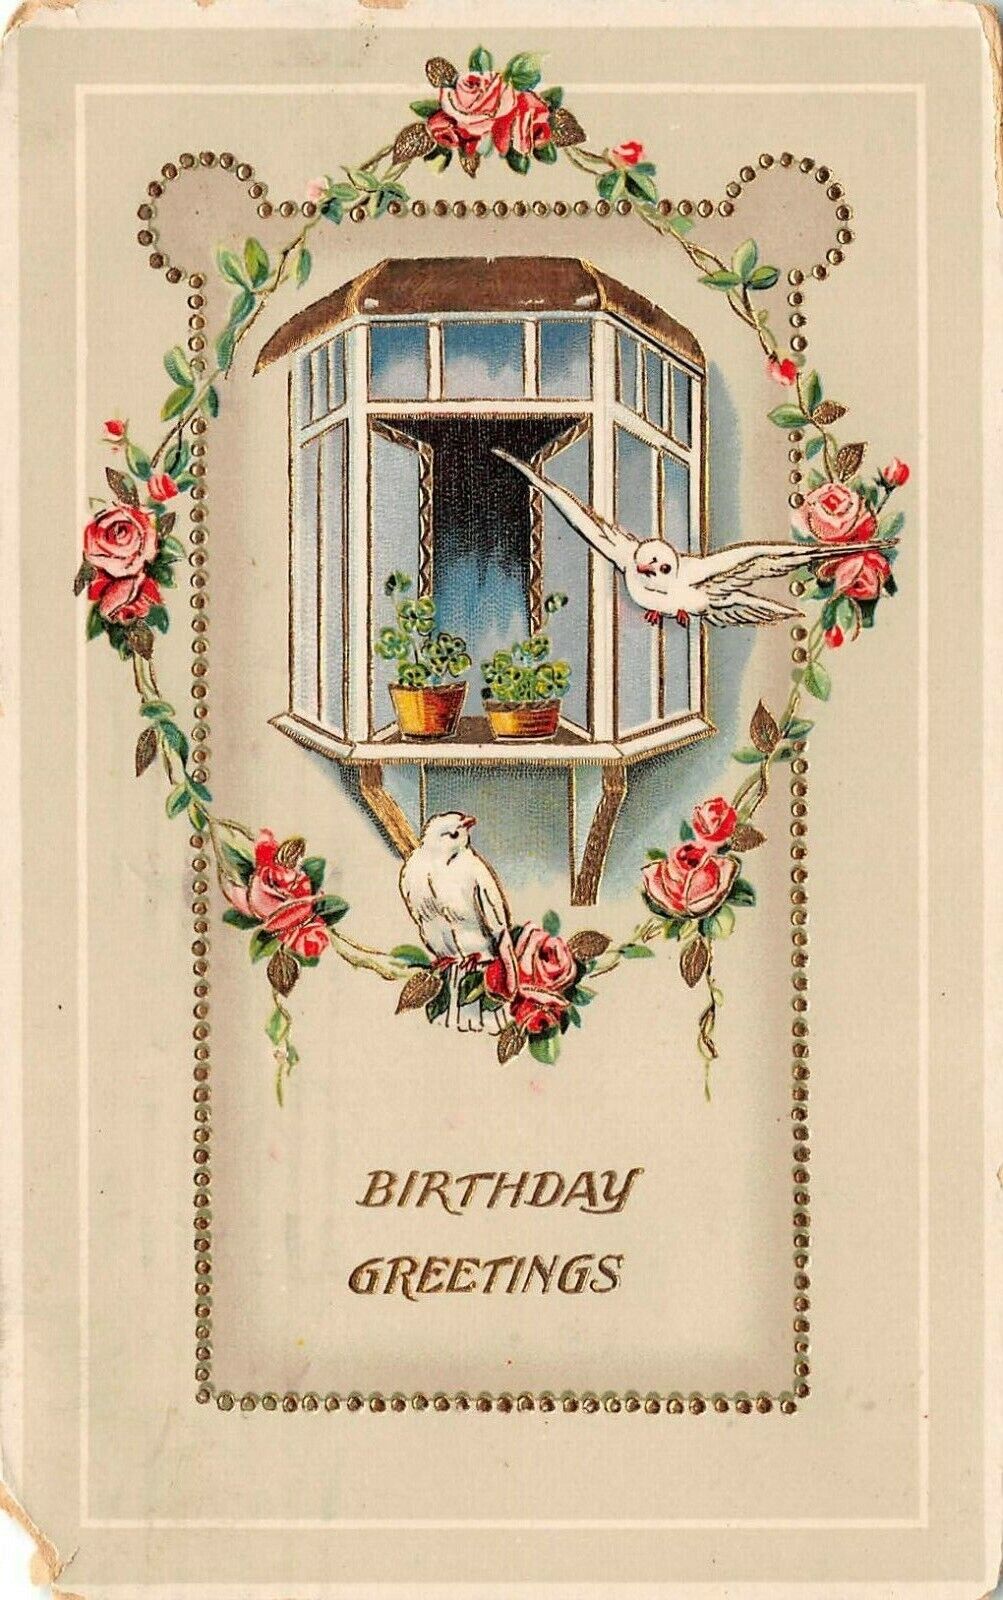  1913 Birthday Greetings Pink Roses & White Dolls Embroidered Postcard